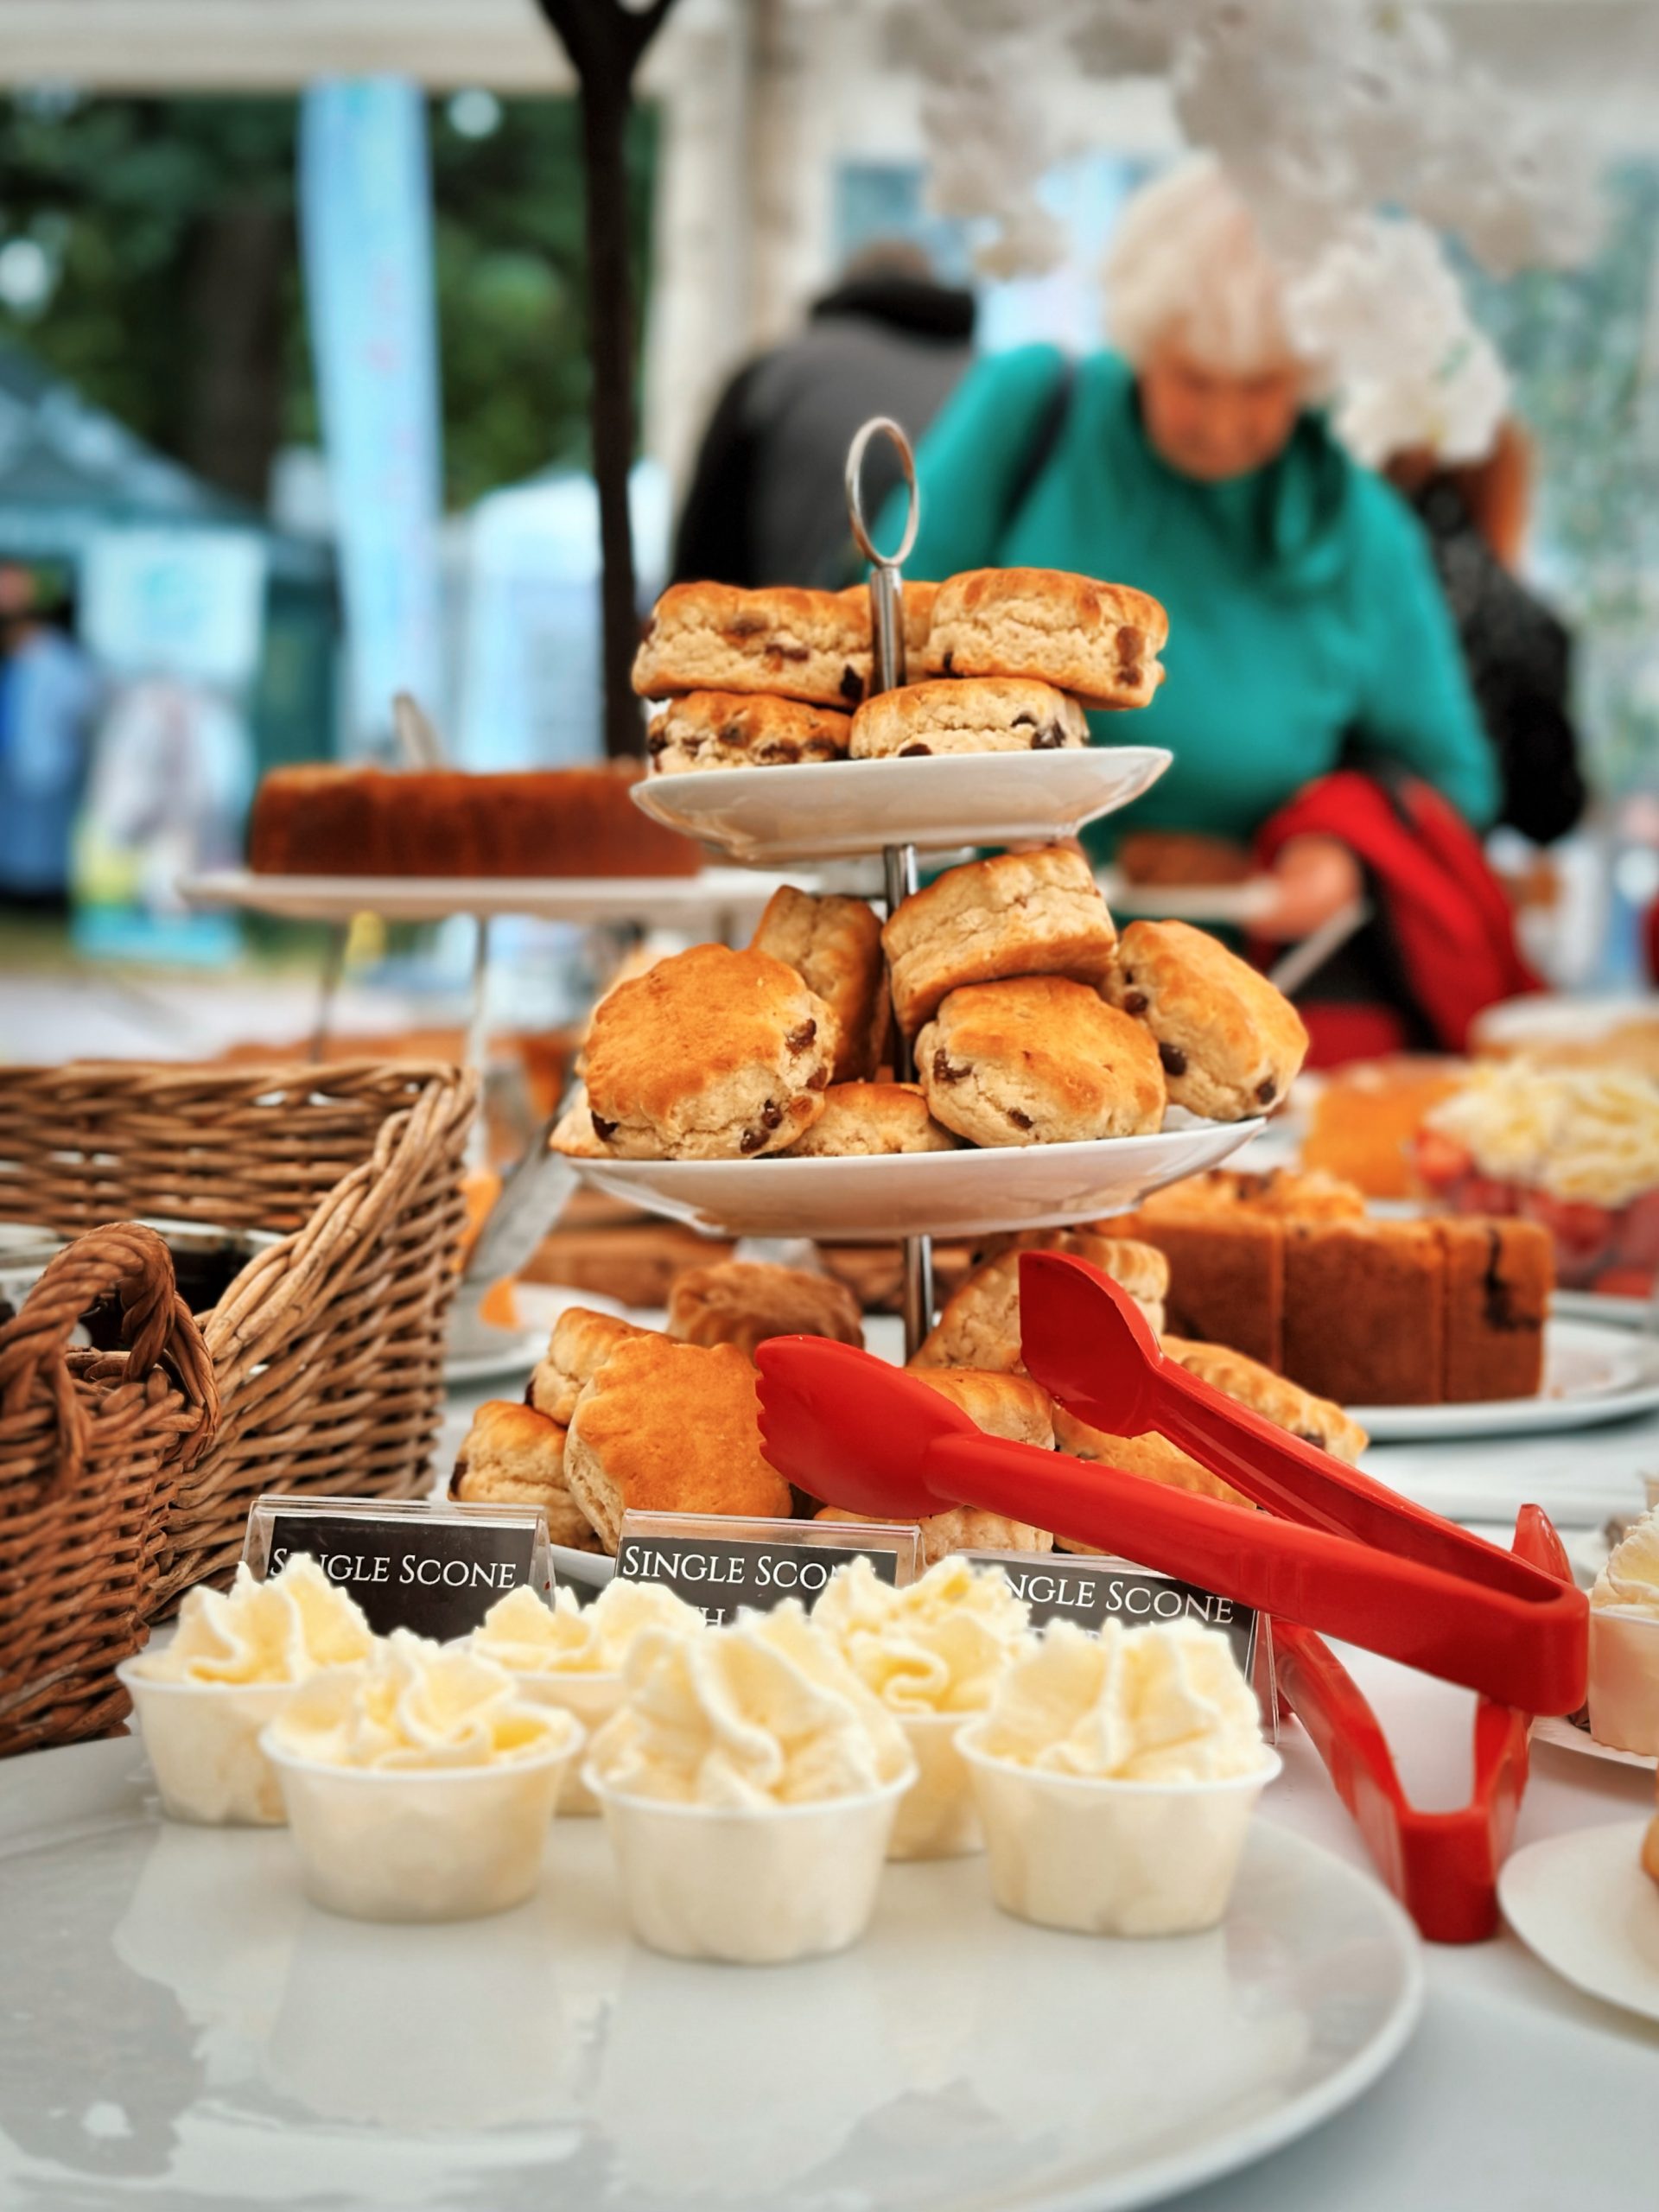 A plate of scones in a marquee